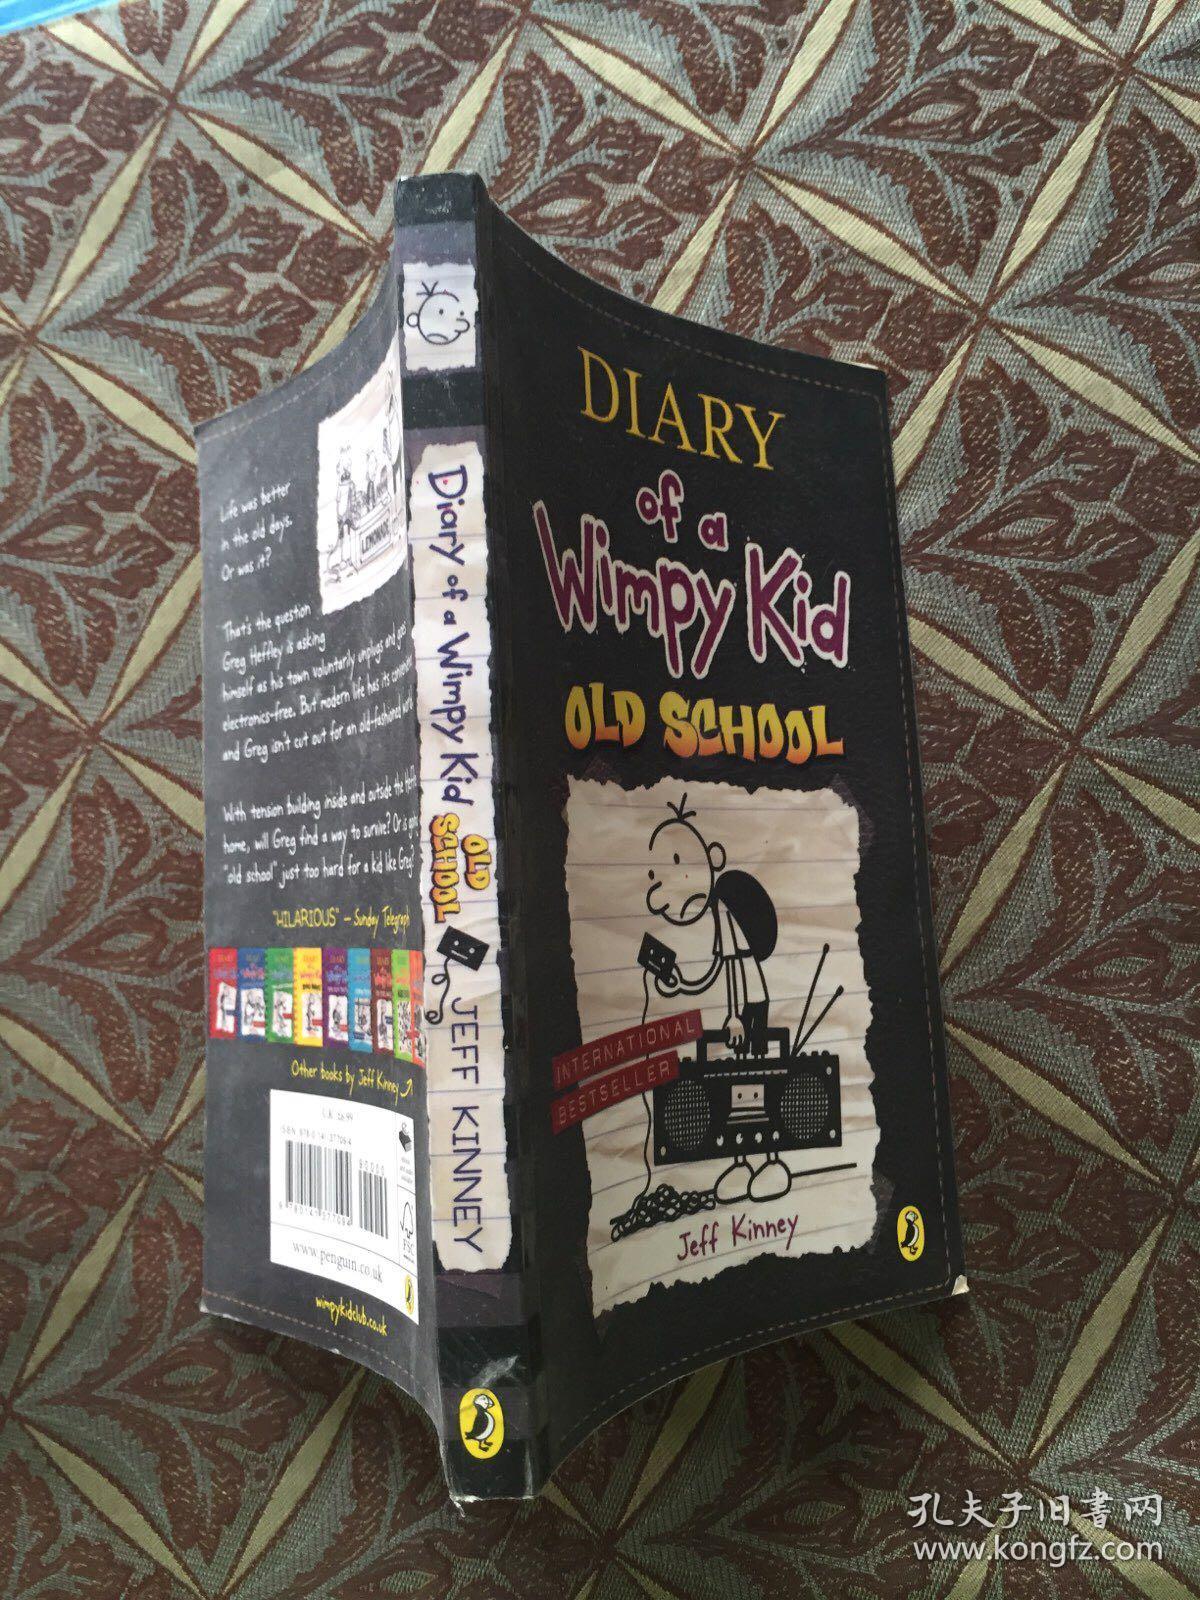 DIARY of a Wimpy Kid OLD SGHOOL